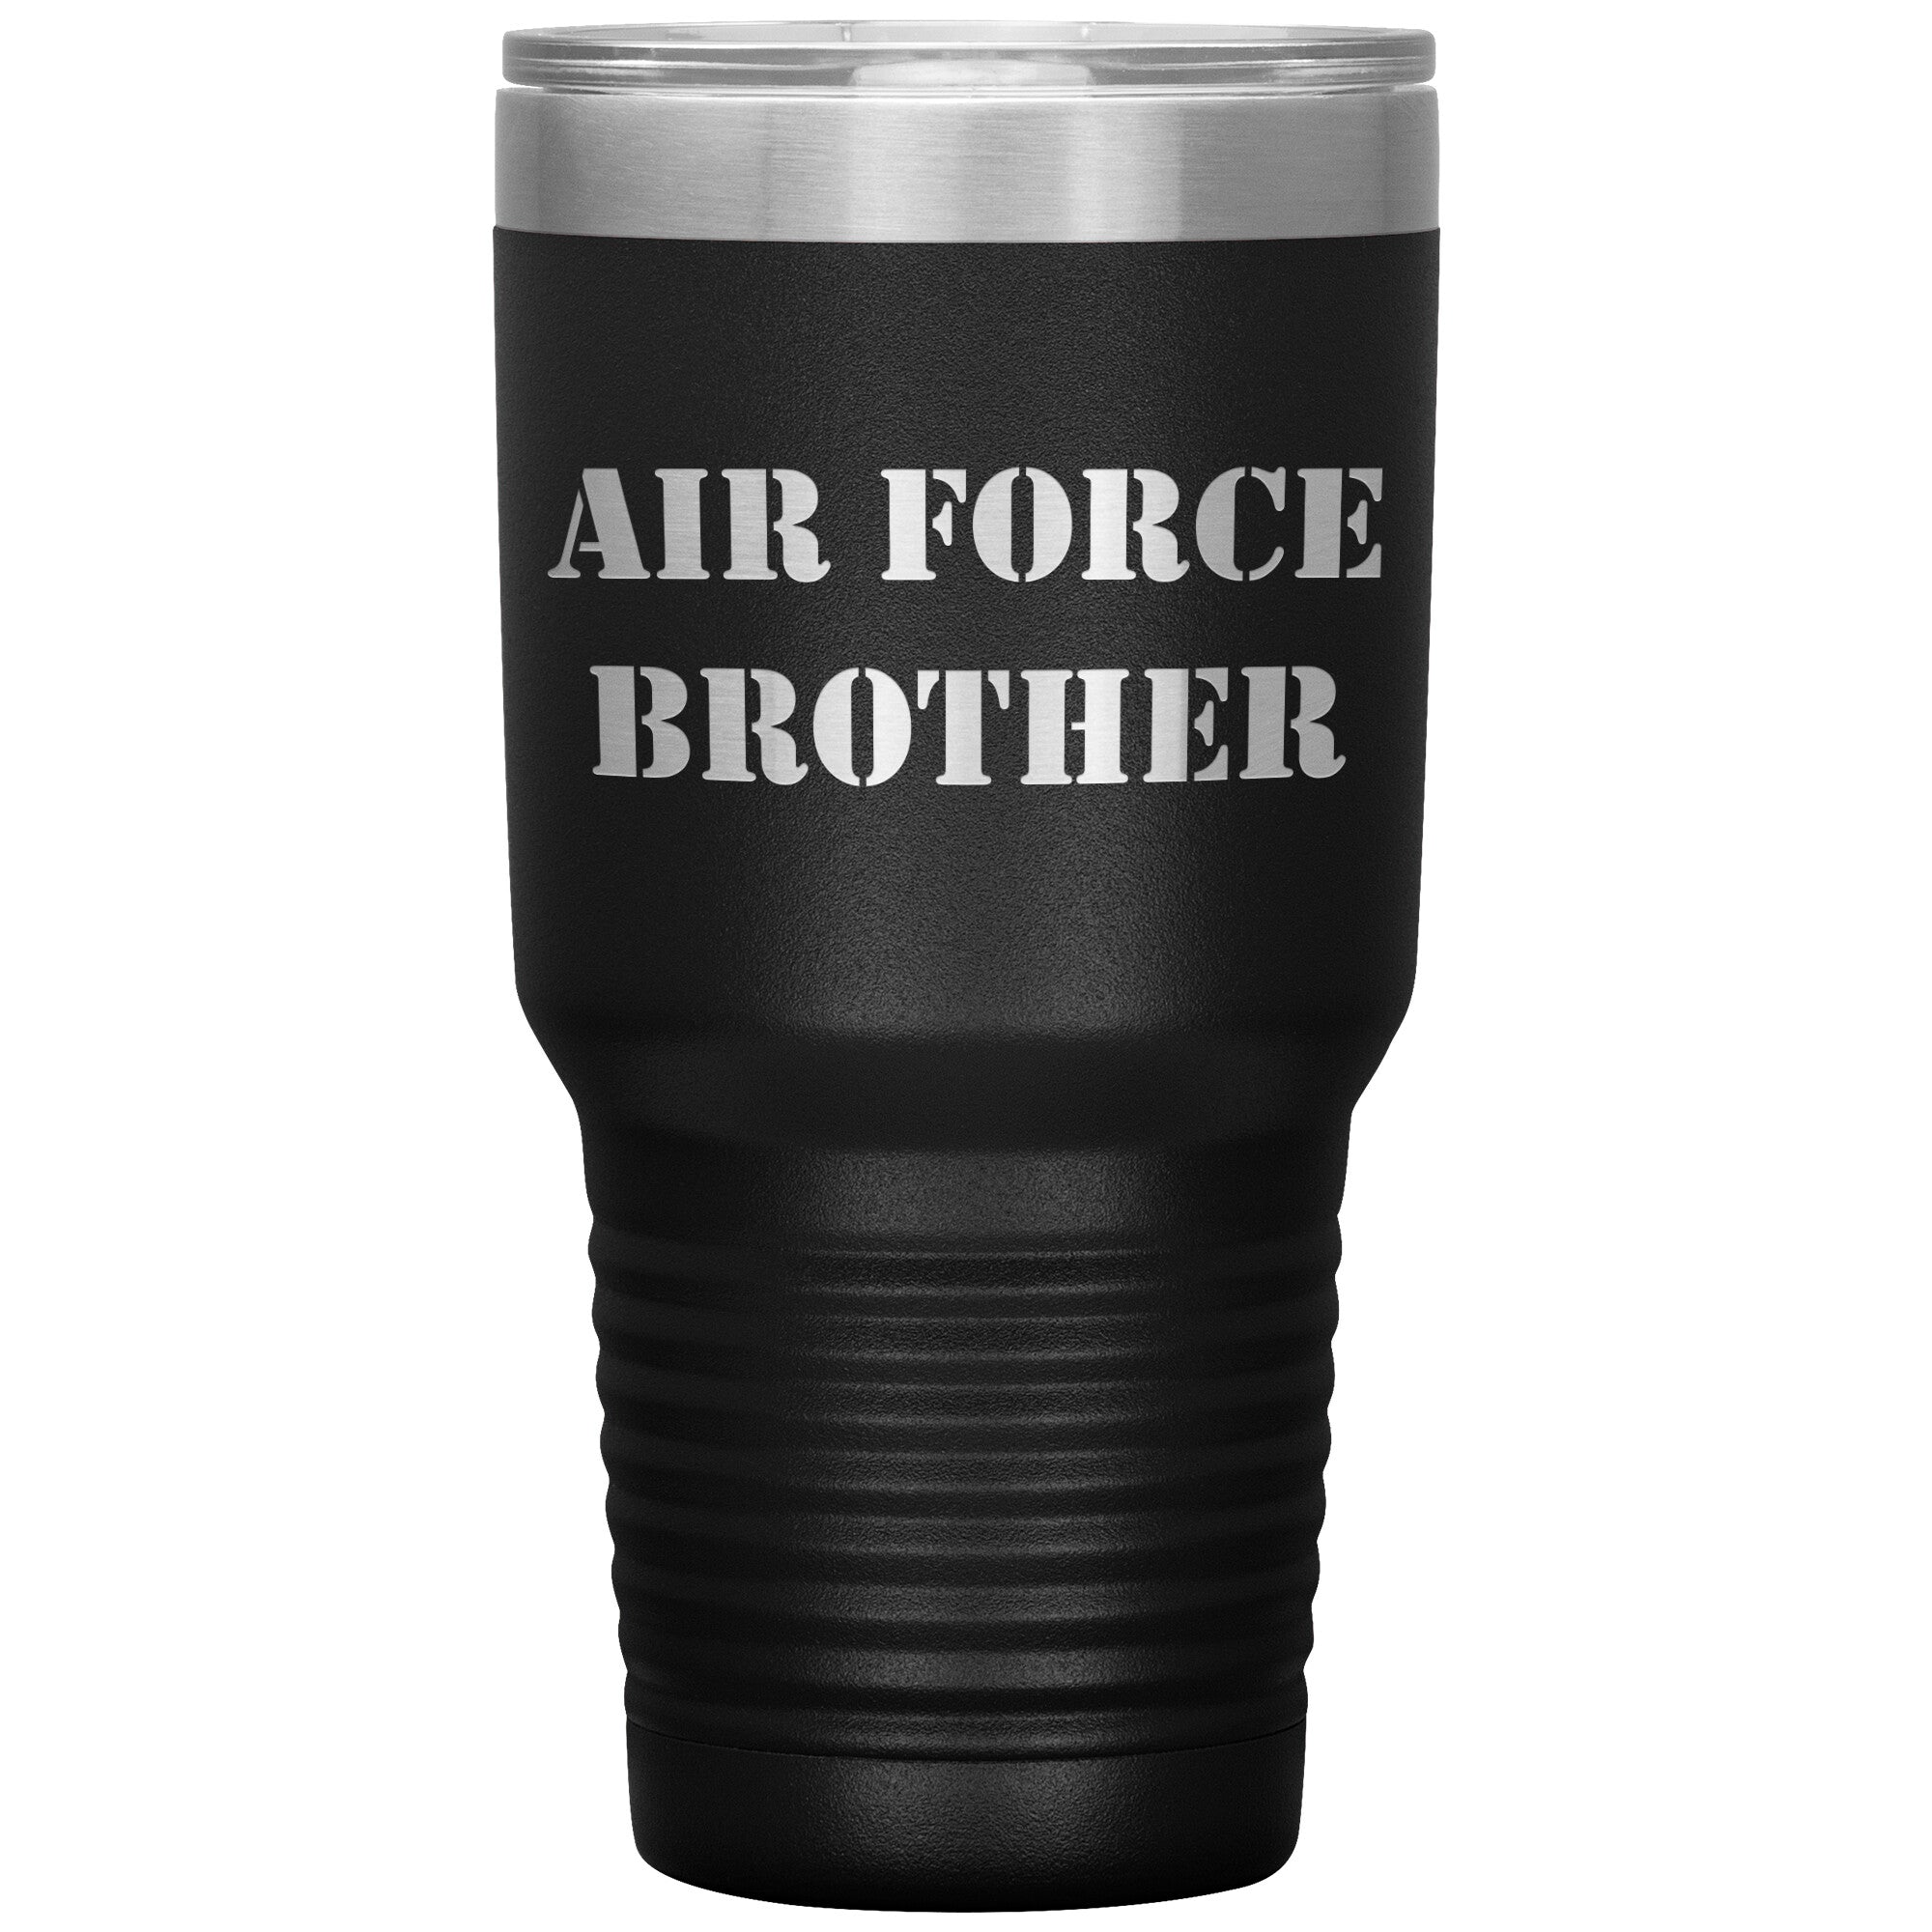 Air Force Brother - 30oz Insulated Tumbler